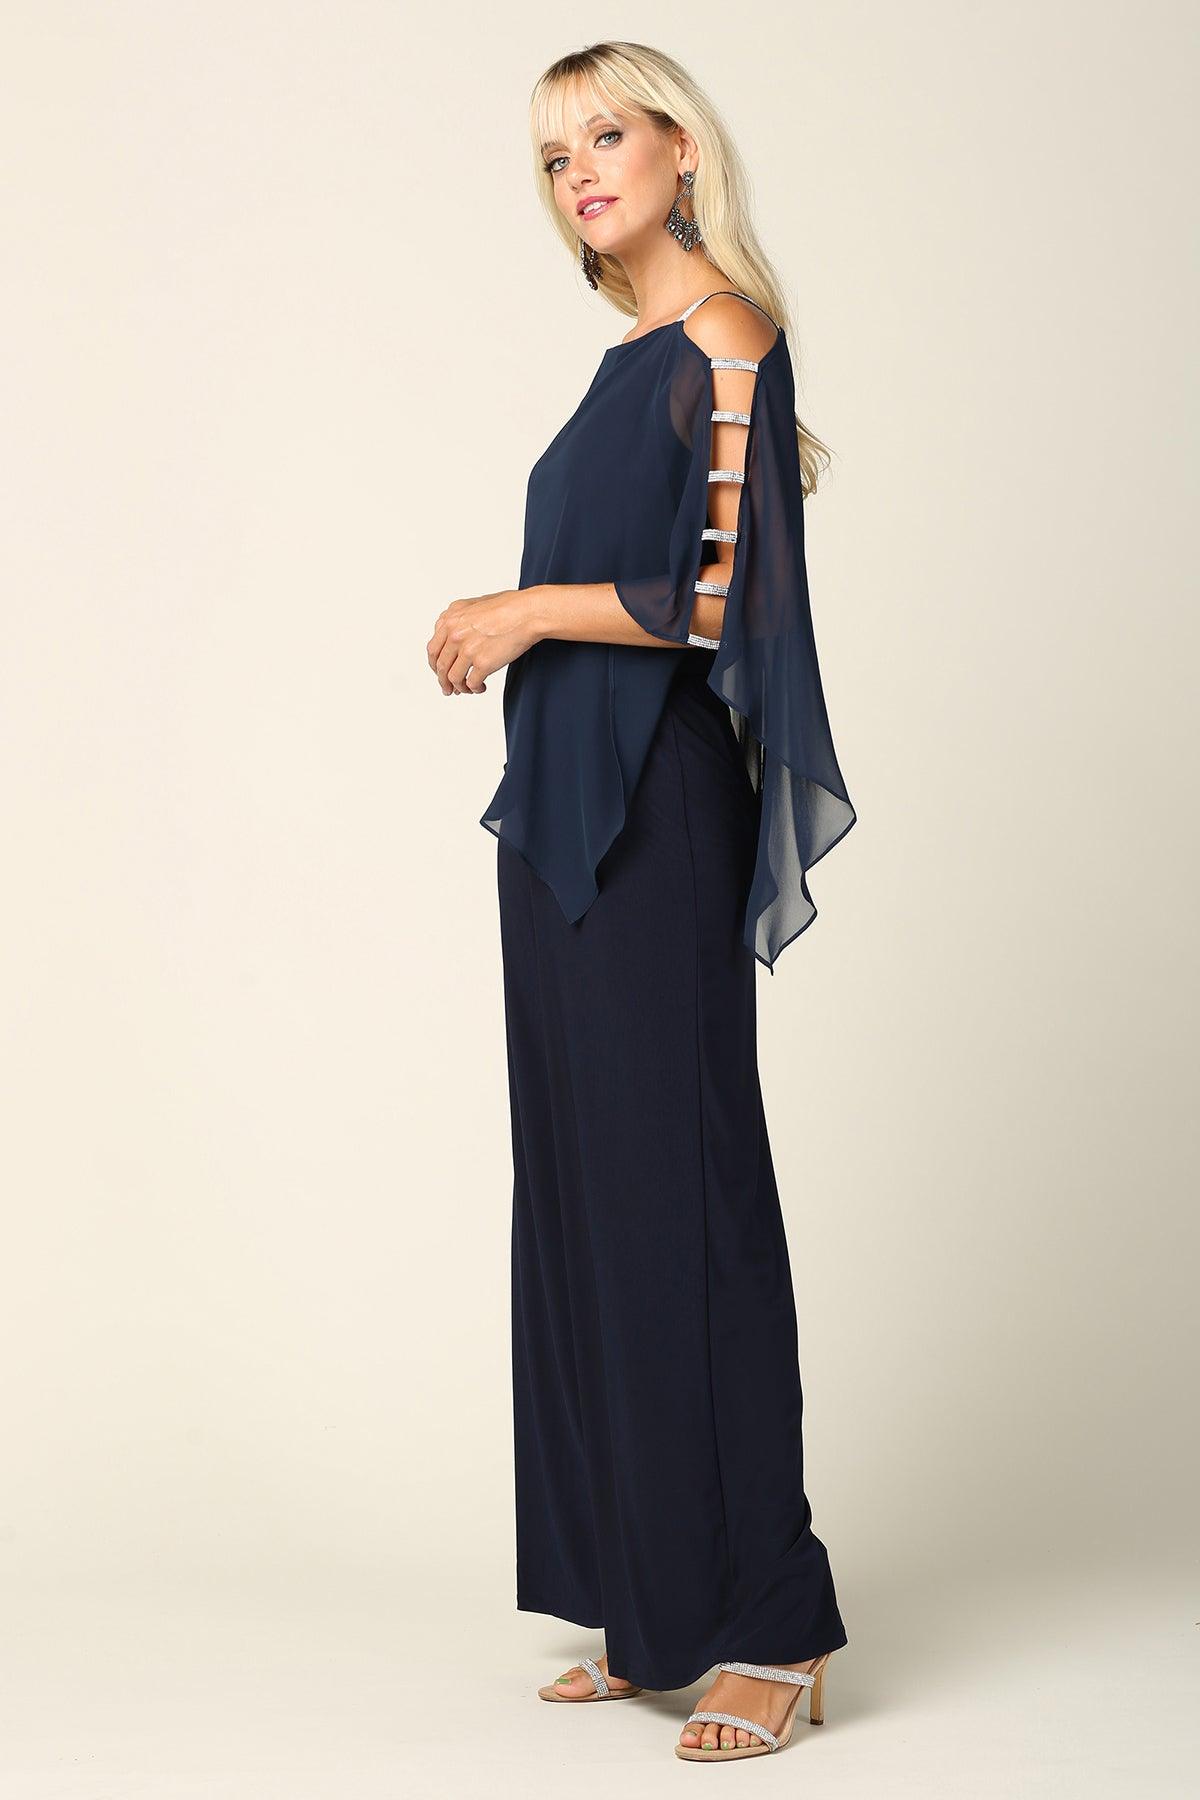 Formal Chiffon Cape Overlay Jumpsuit - The Dress Outlet